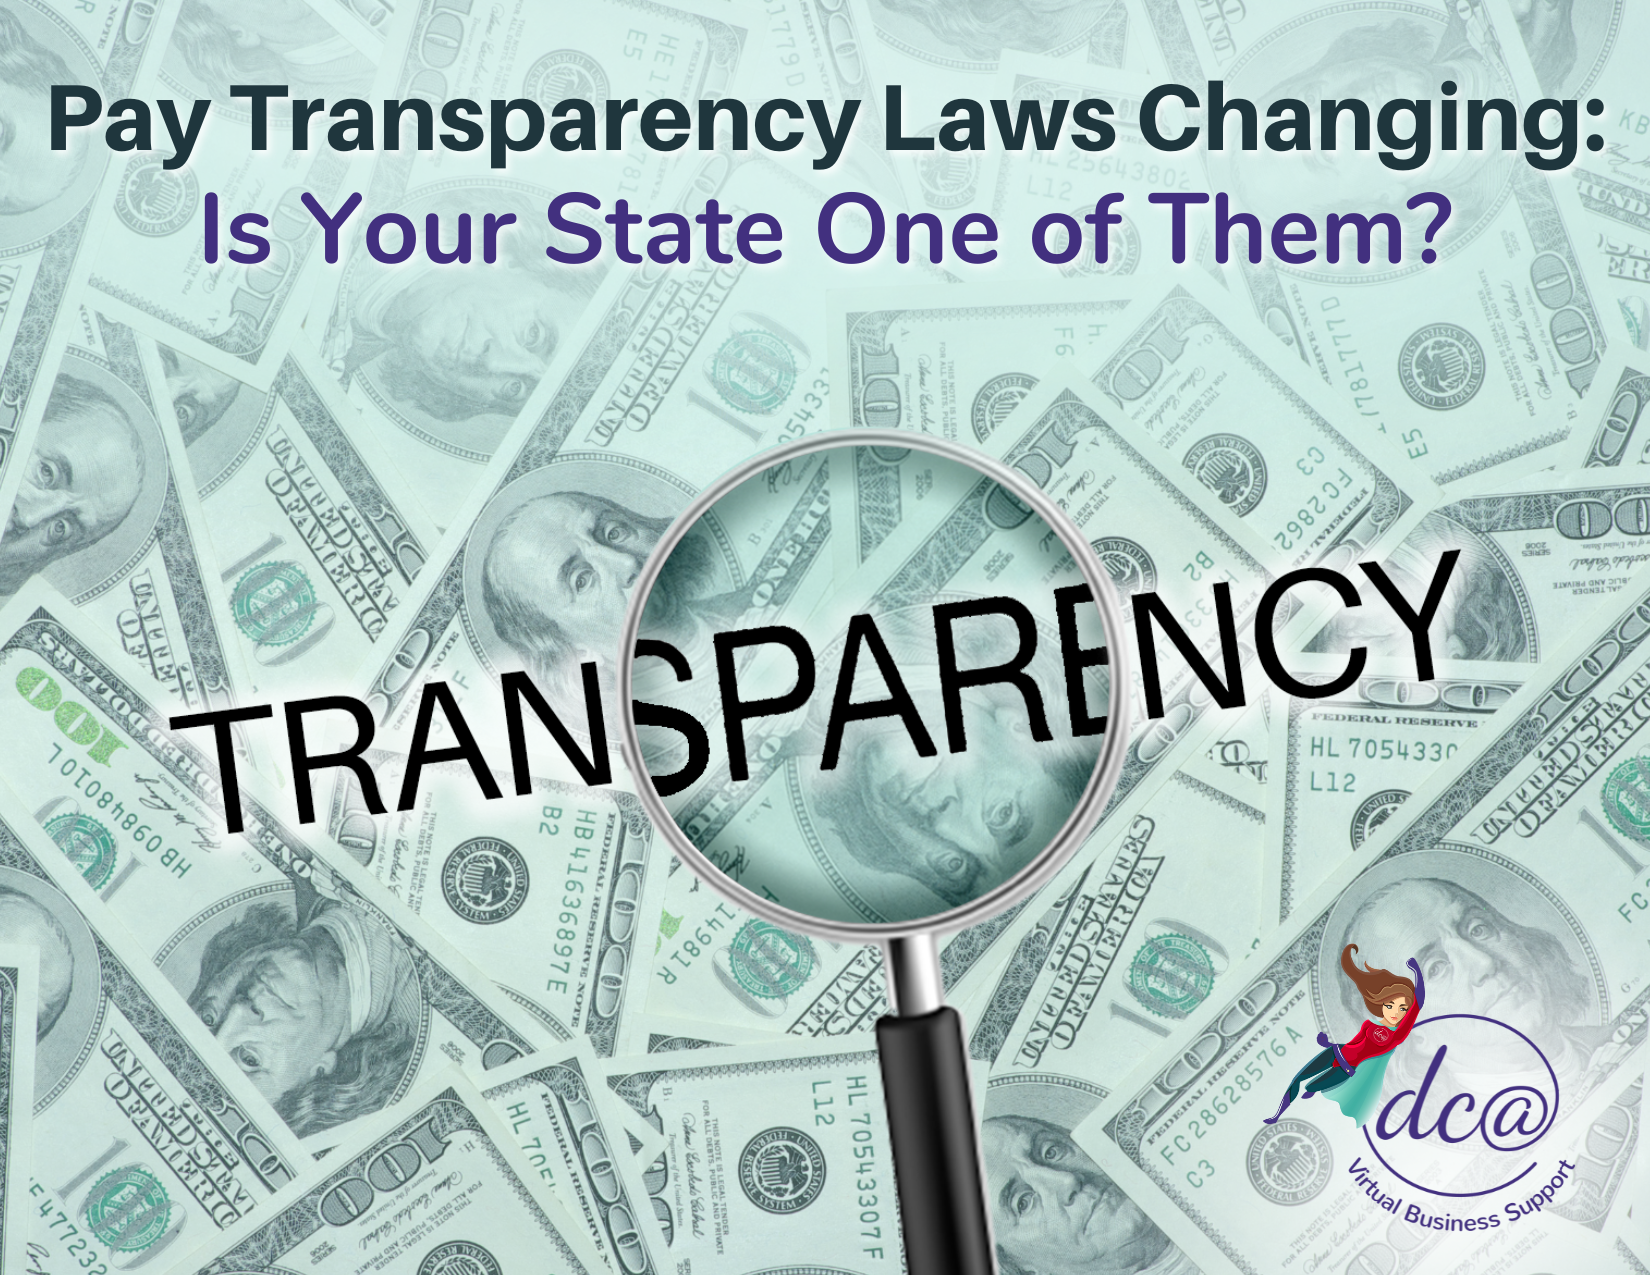 Pay Transparency Laws Changing: Is Your State One of Them. Image of a magnifying glass over the word 'Transparency' with a background made of $100 bills. DCA Virtual Business Support.